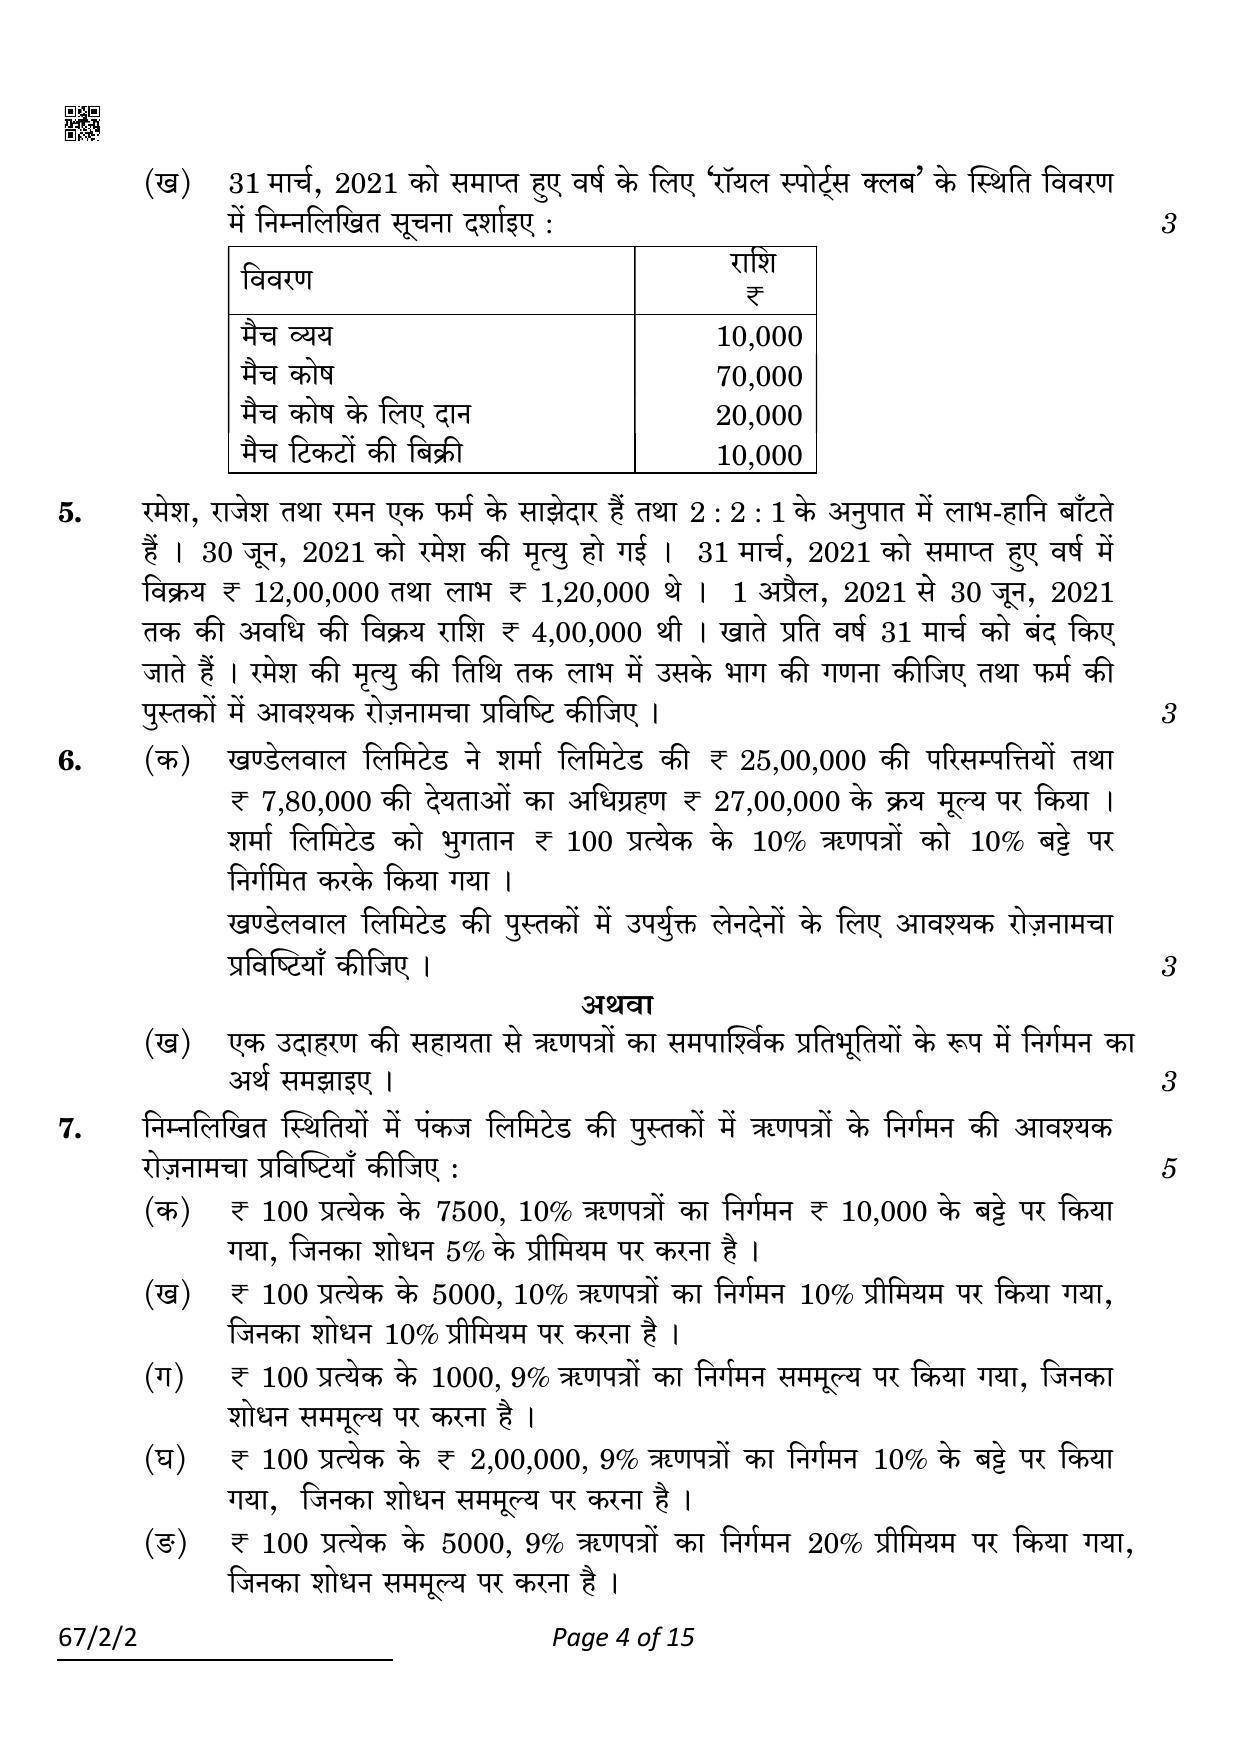 CBSE Class 12 67-2-2 Accountancy 2022 Question Paper - Page 4